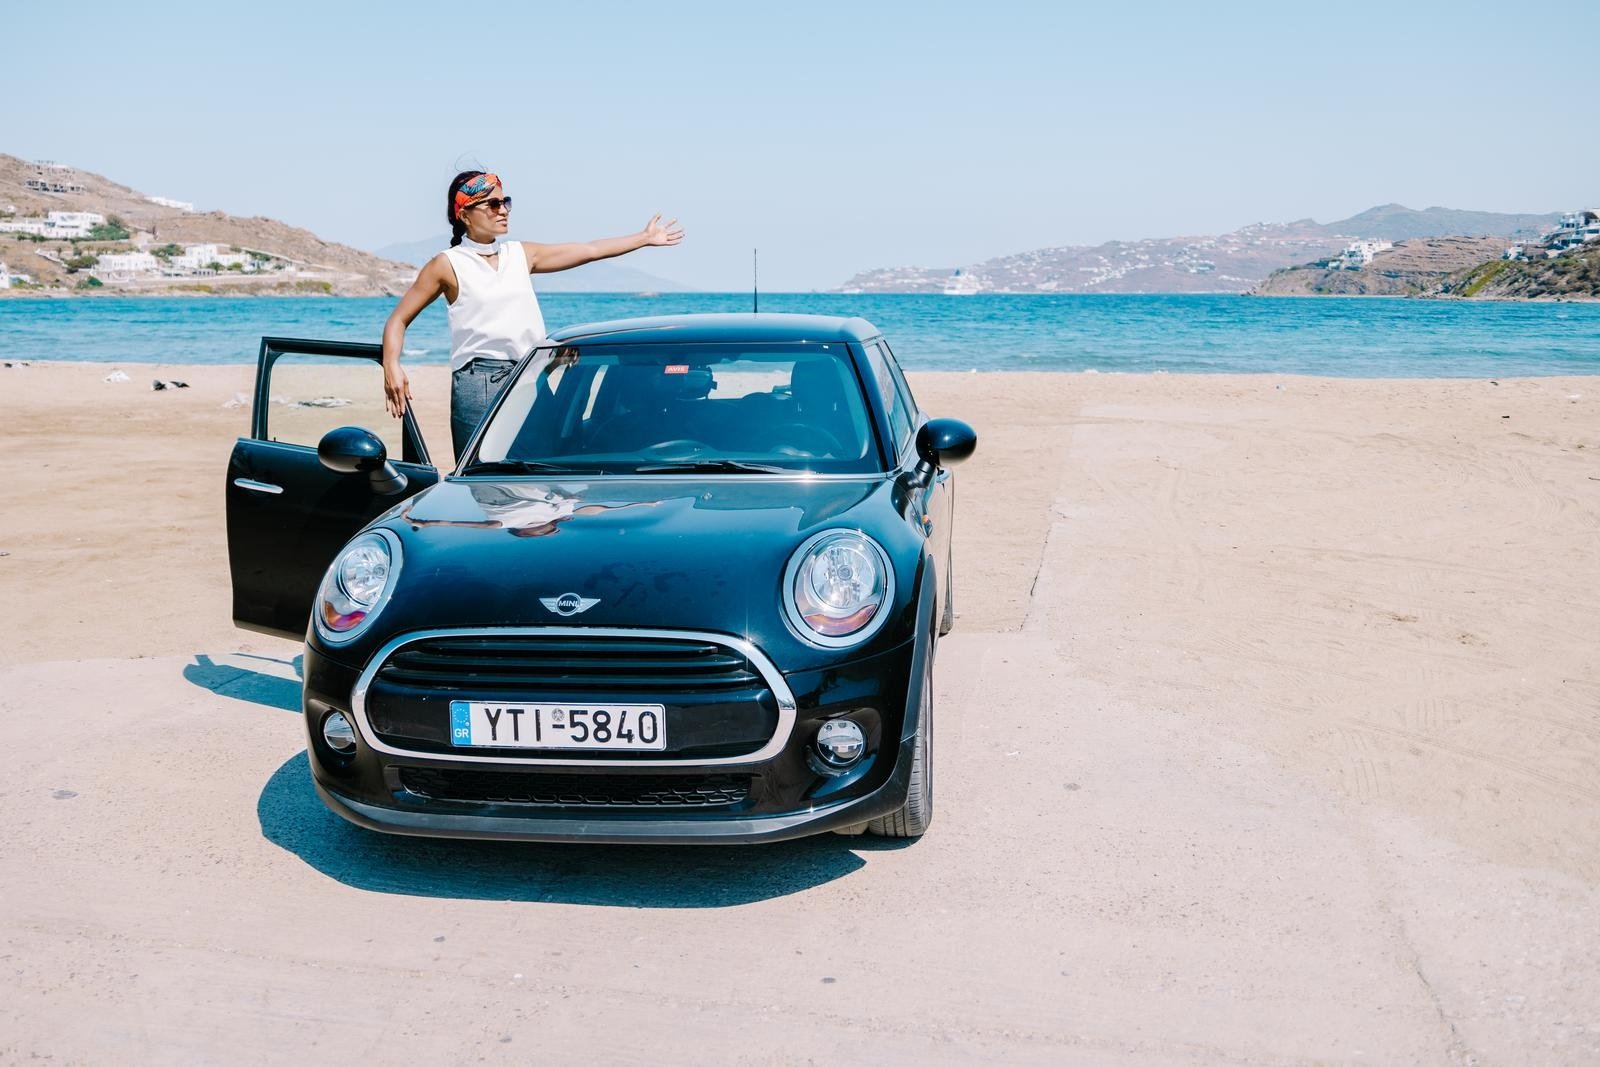 <p><span>If you’re after a worry-free ride, skip <a href="https://www.miramarspeedcircuit.com/mini-countryman-avoid-years/">the used Mini Cooper</a> and opt for something more reliable. These cute rides are infamous for being expensive to maintain. They can have issues with the valve system, leading to problems with burning oil. </span></p><p><span>On top of that, some models have timing chain troubles, which can be a major fix. While it’s a blast to drive, all those repairs can quickly add up, and you’re left feeling more like a mechanic than a driver.</span></p>